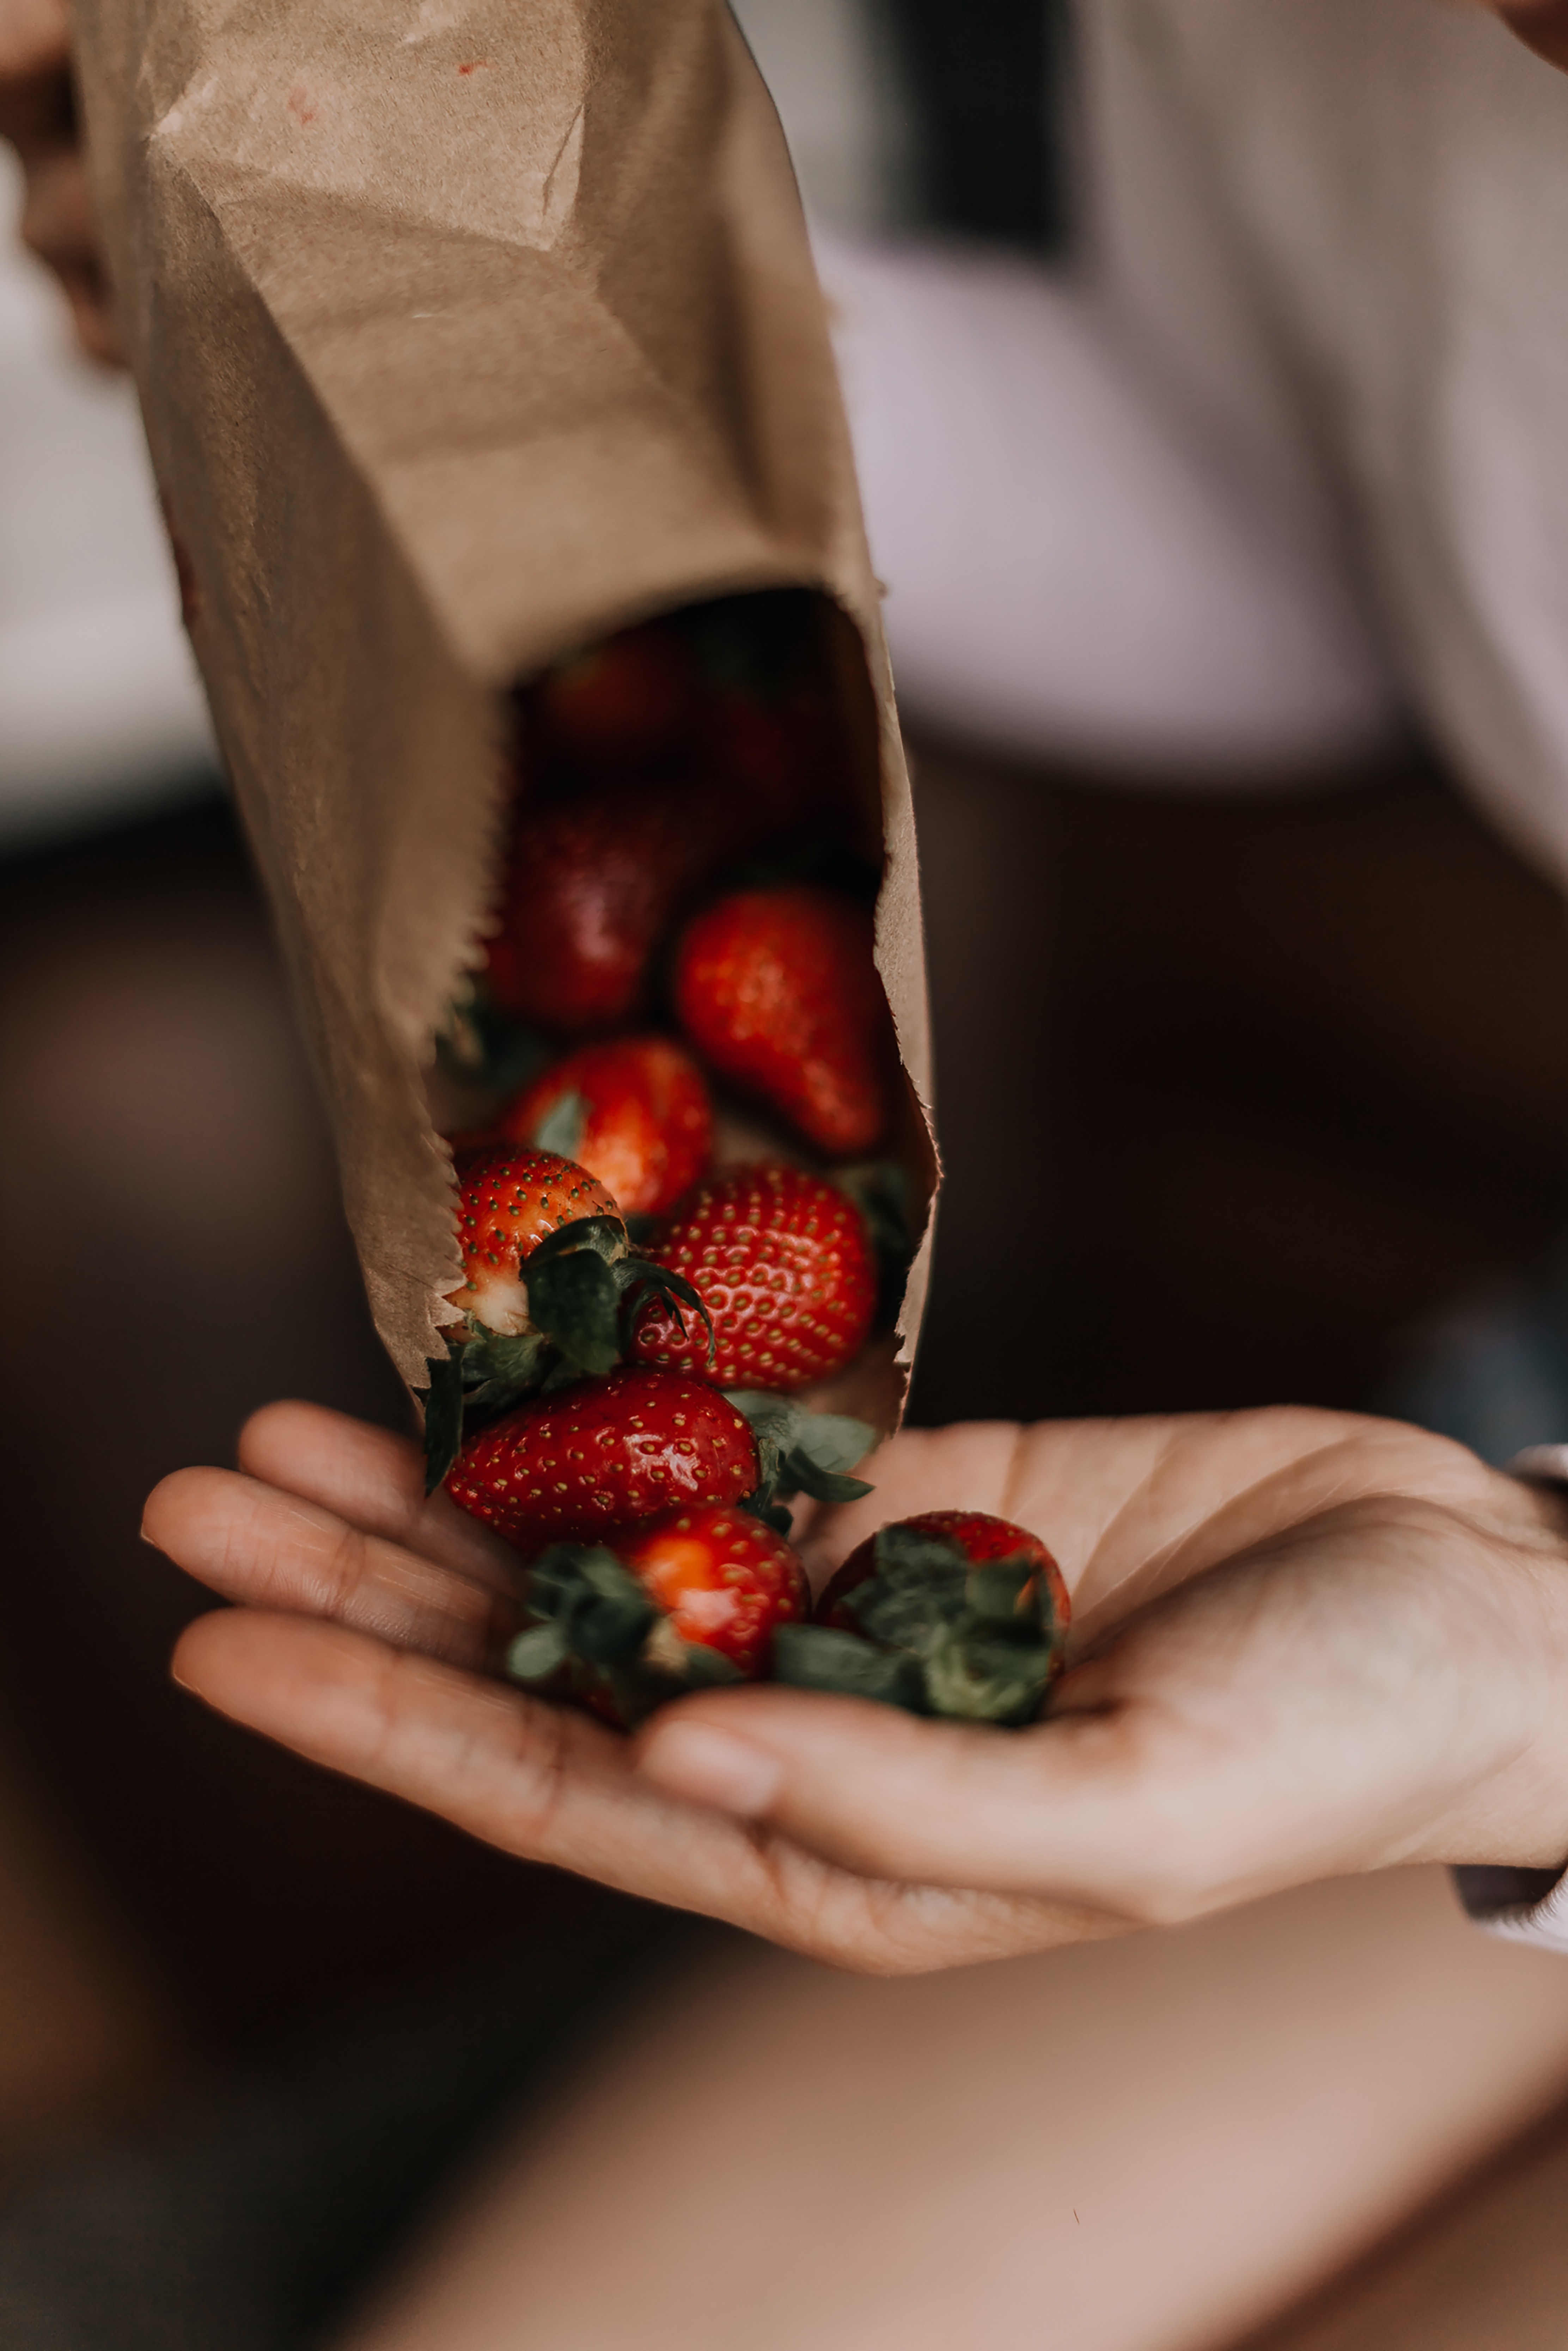 package, fruits, food, strawberry, berries, hand, packet